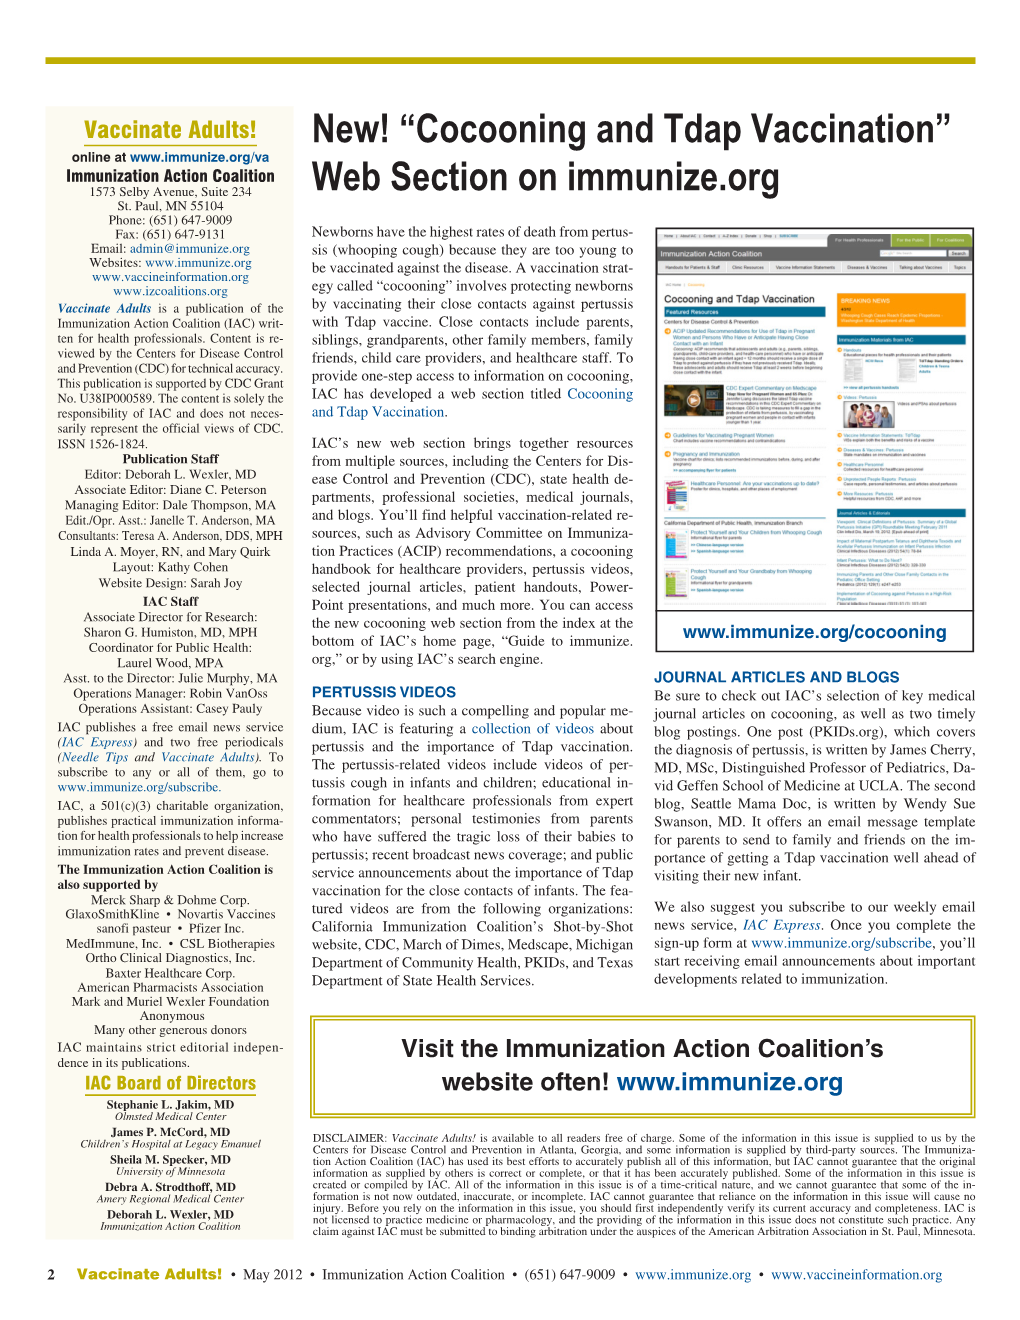 Cocooning and Tdap Vaccination Web Section on Immunize.Org